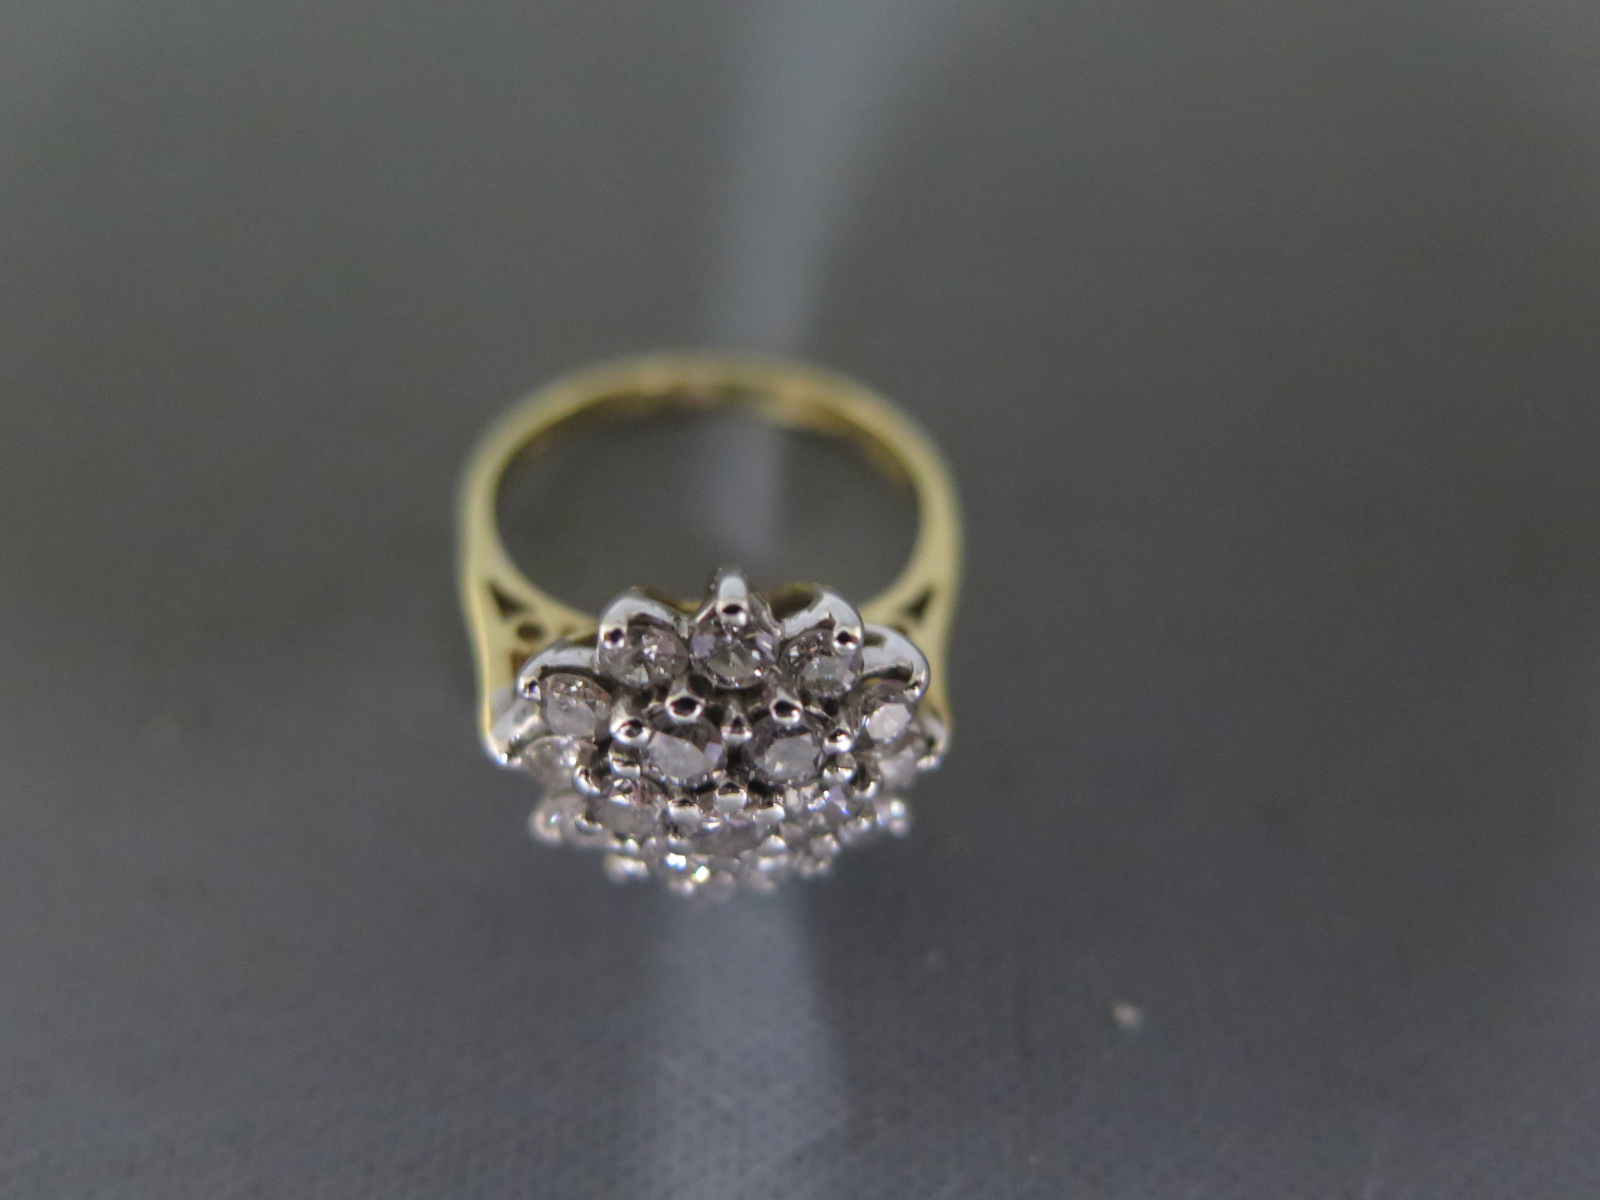 An 18ct yellow gold and diamond cluster ring size H - approx weight 4 grams - clean and bright - Image 2 of 2